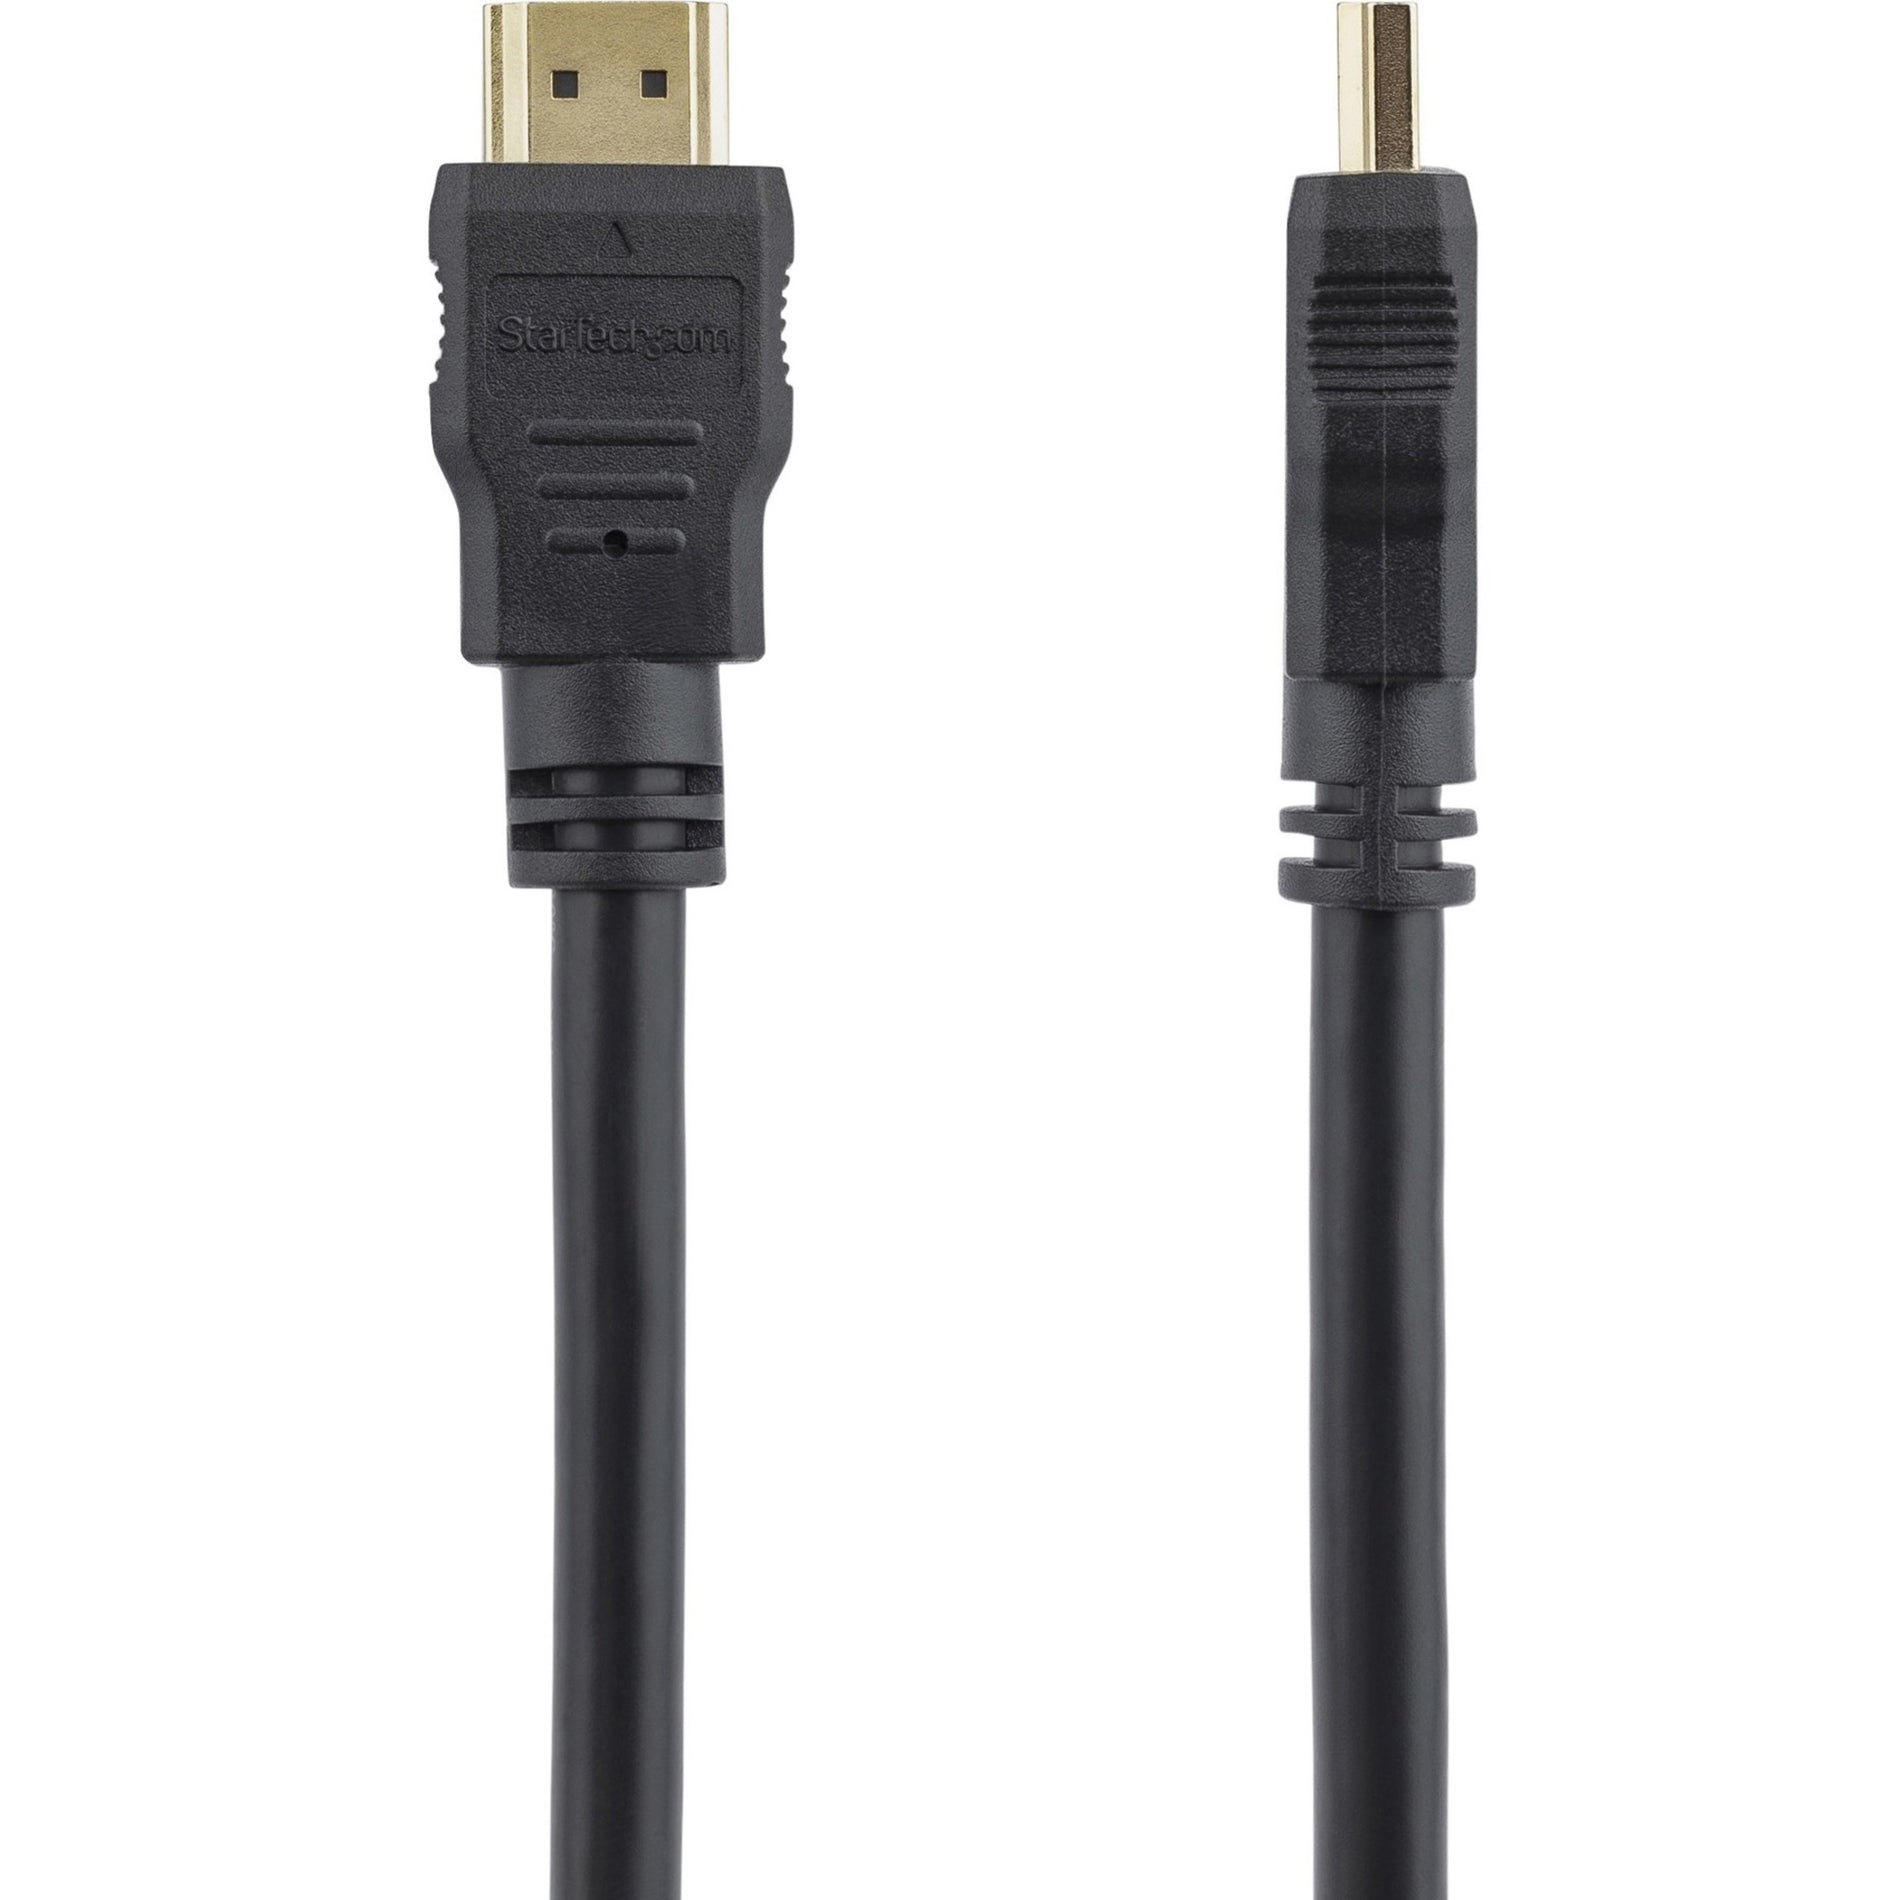 StarTech.com HDMM1M 1m High Speed HDMI Cable - Ultra HD 4k x 2k HDMI Cable, Molded, Corrosion Resistant, Strain Relief, Copper Conductor, Shielded, 3.28 ft, Gold Plated Connectors, 28 AWG, 3840 x 2160 Supported Resolution, Black